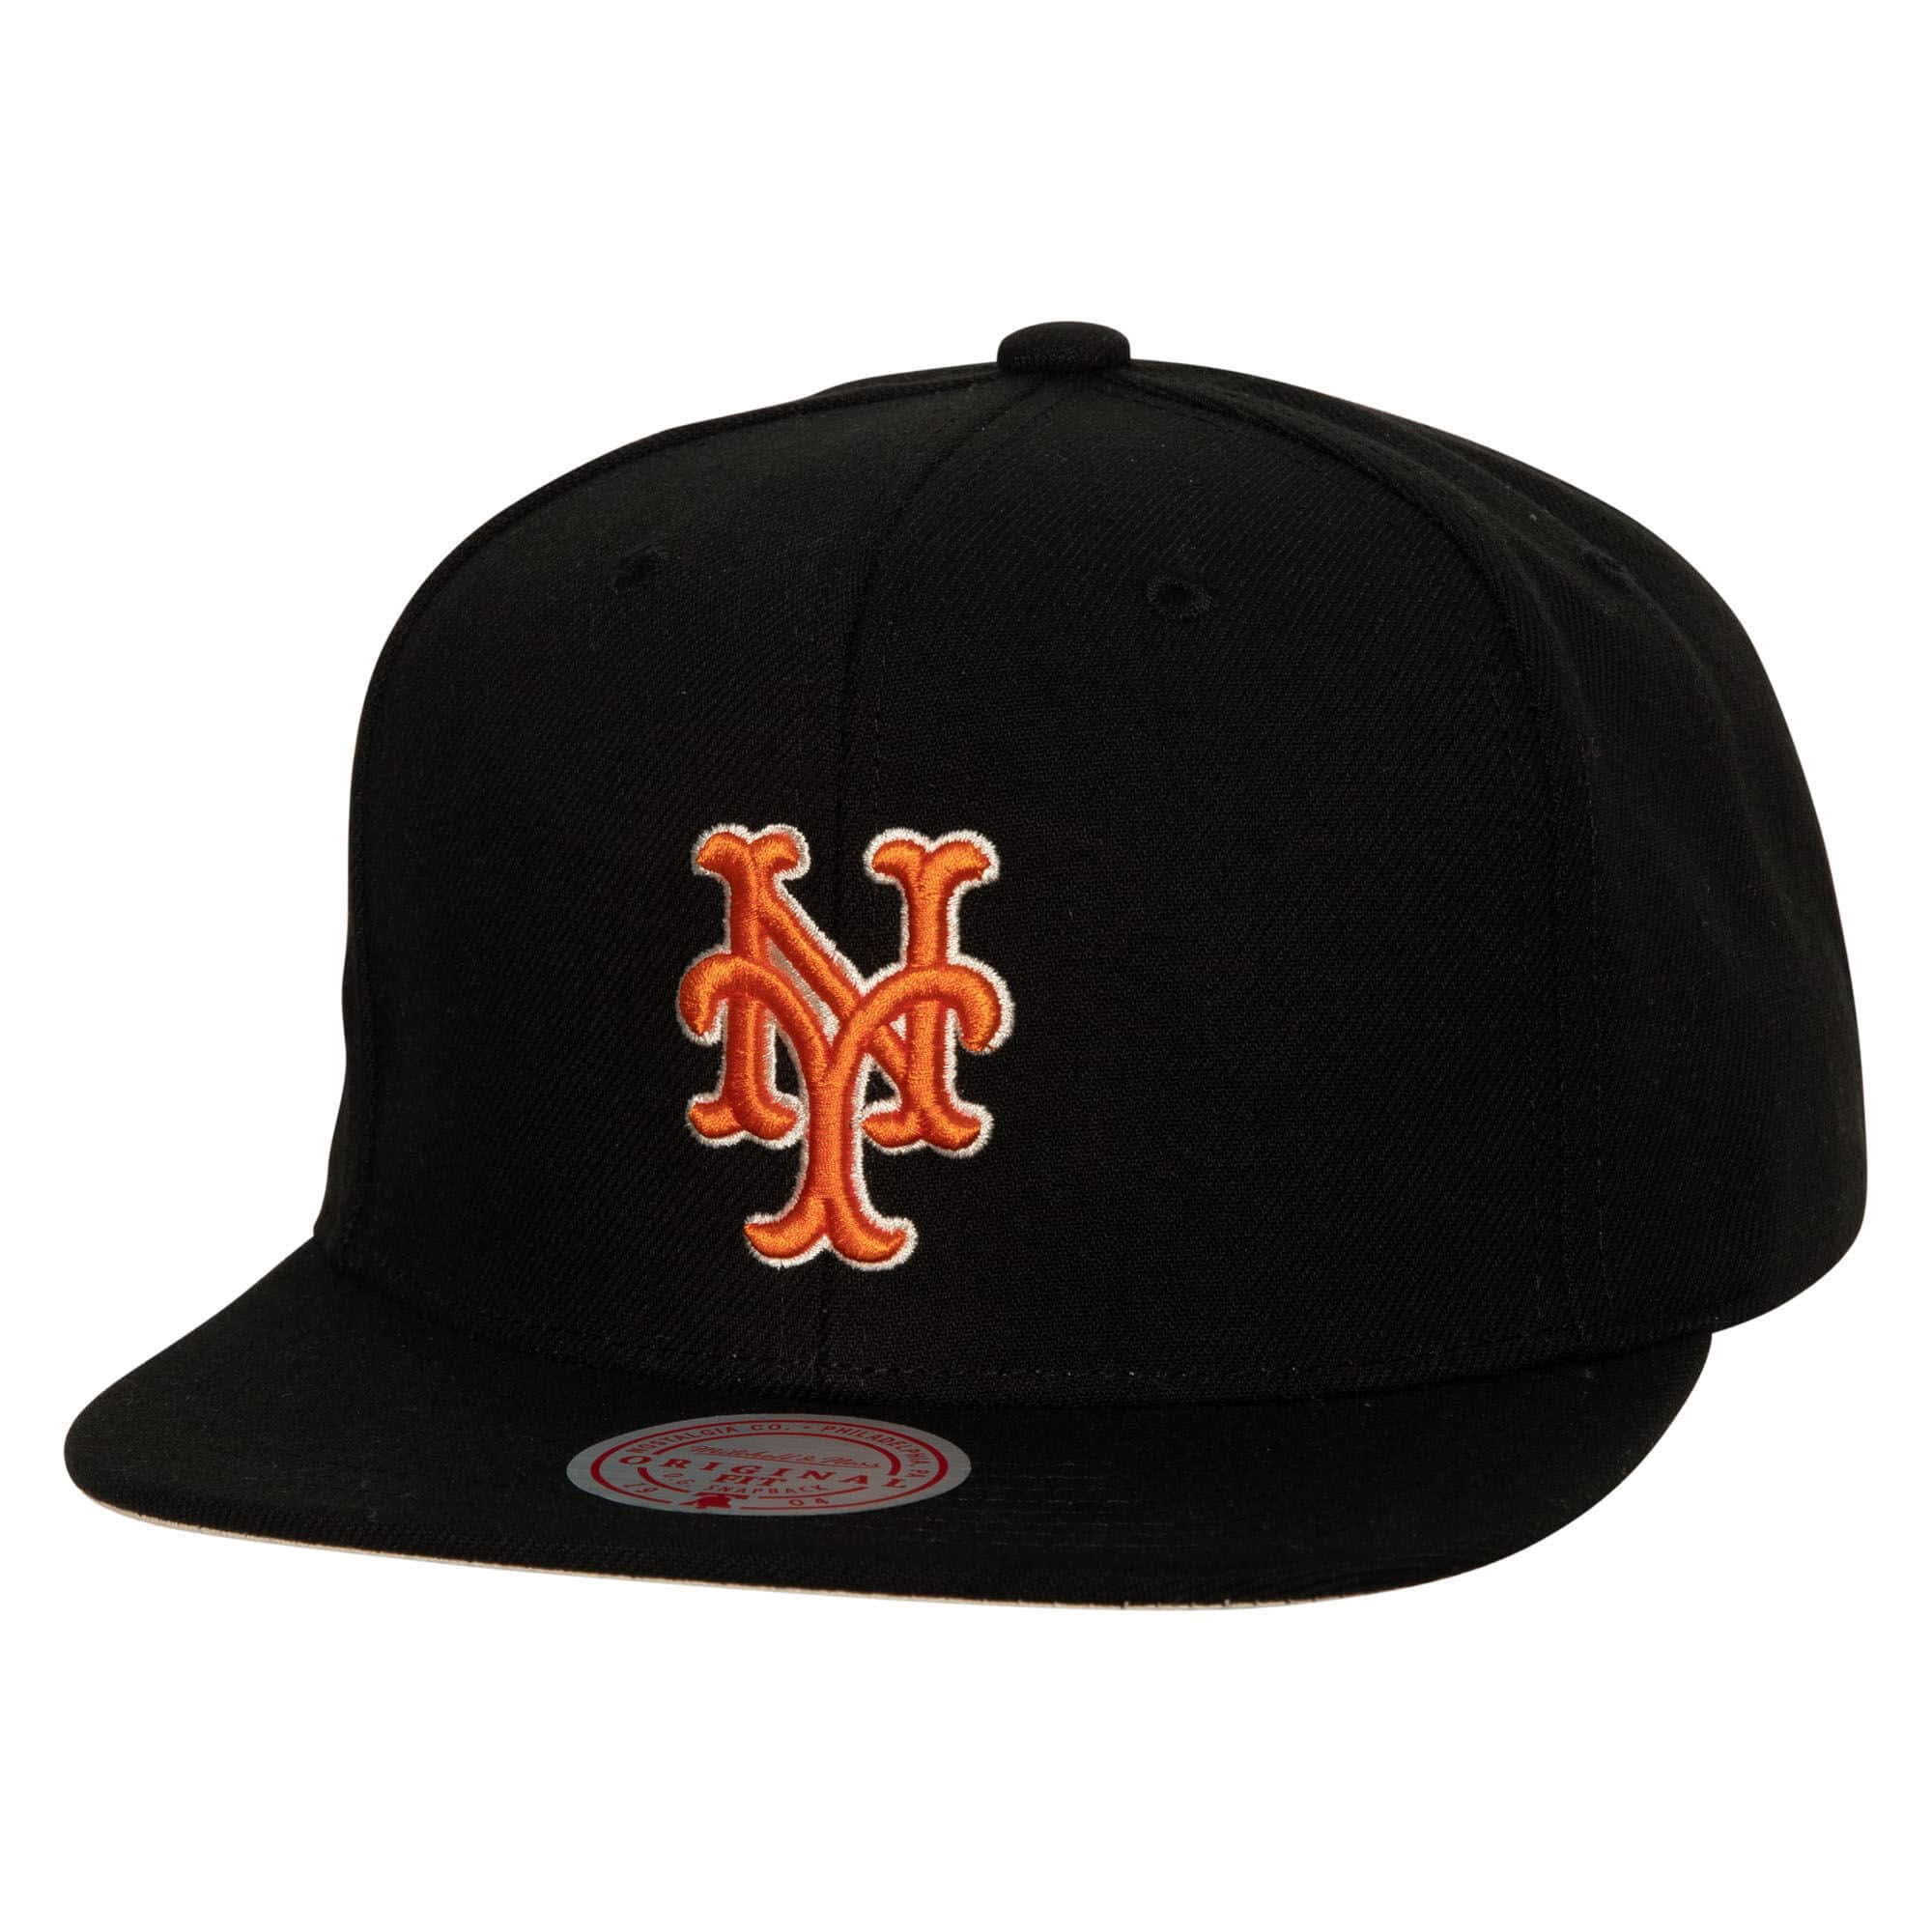 MITCHELL&NESS METS TM CLASSIC SNAP